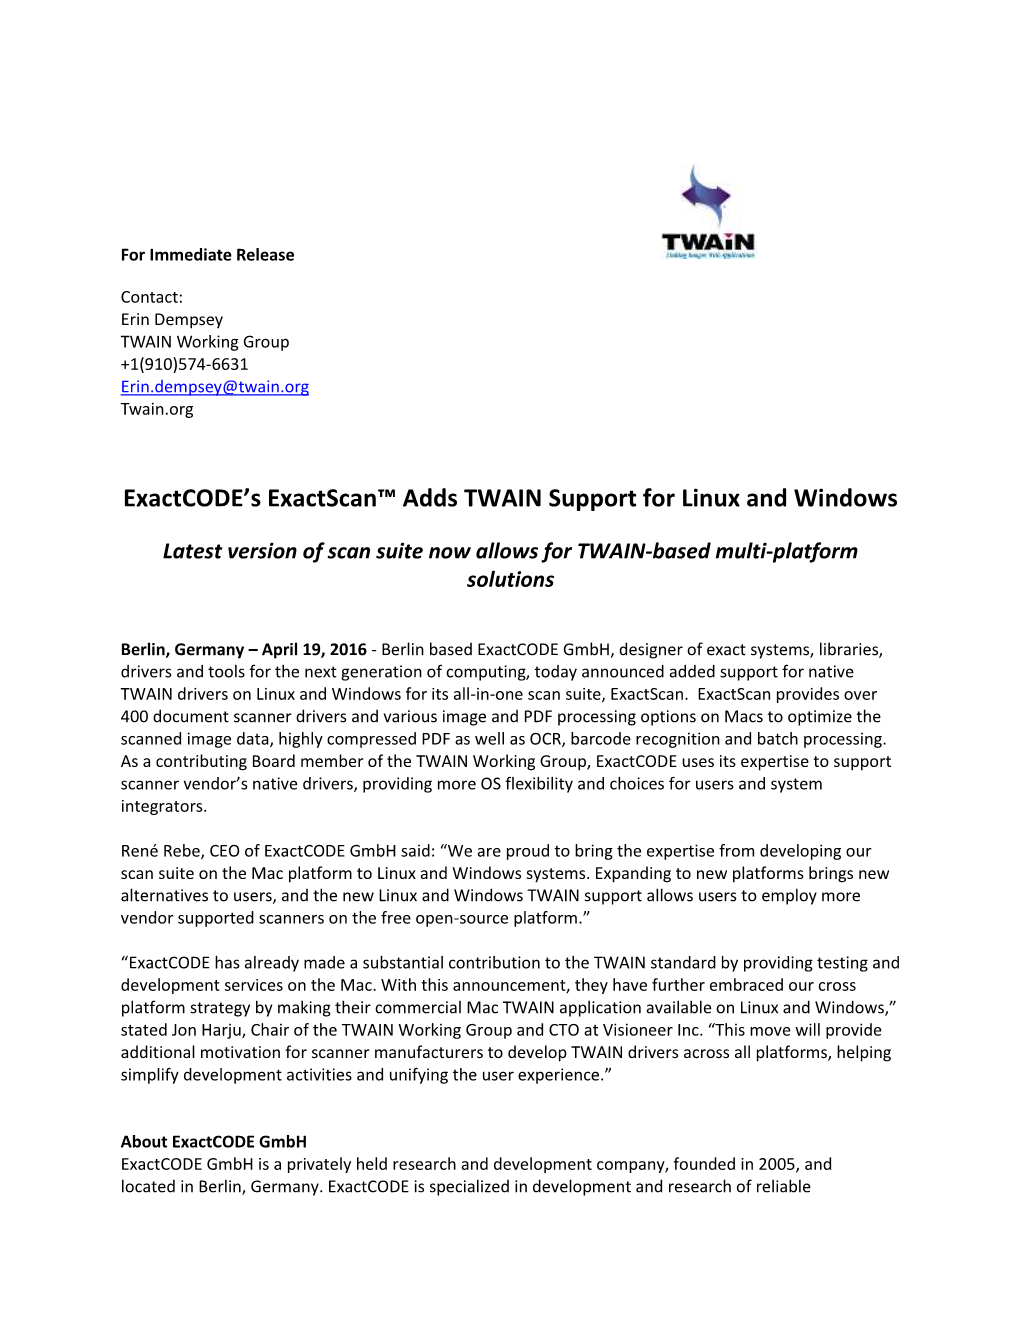 Exactcode's Exactscan™ Adds TWAIN Support for Linux and Windows